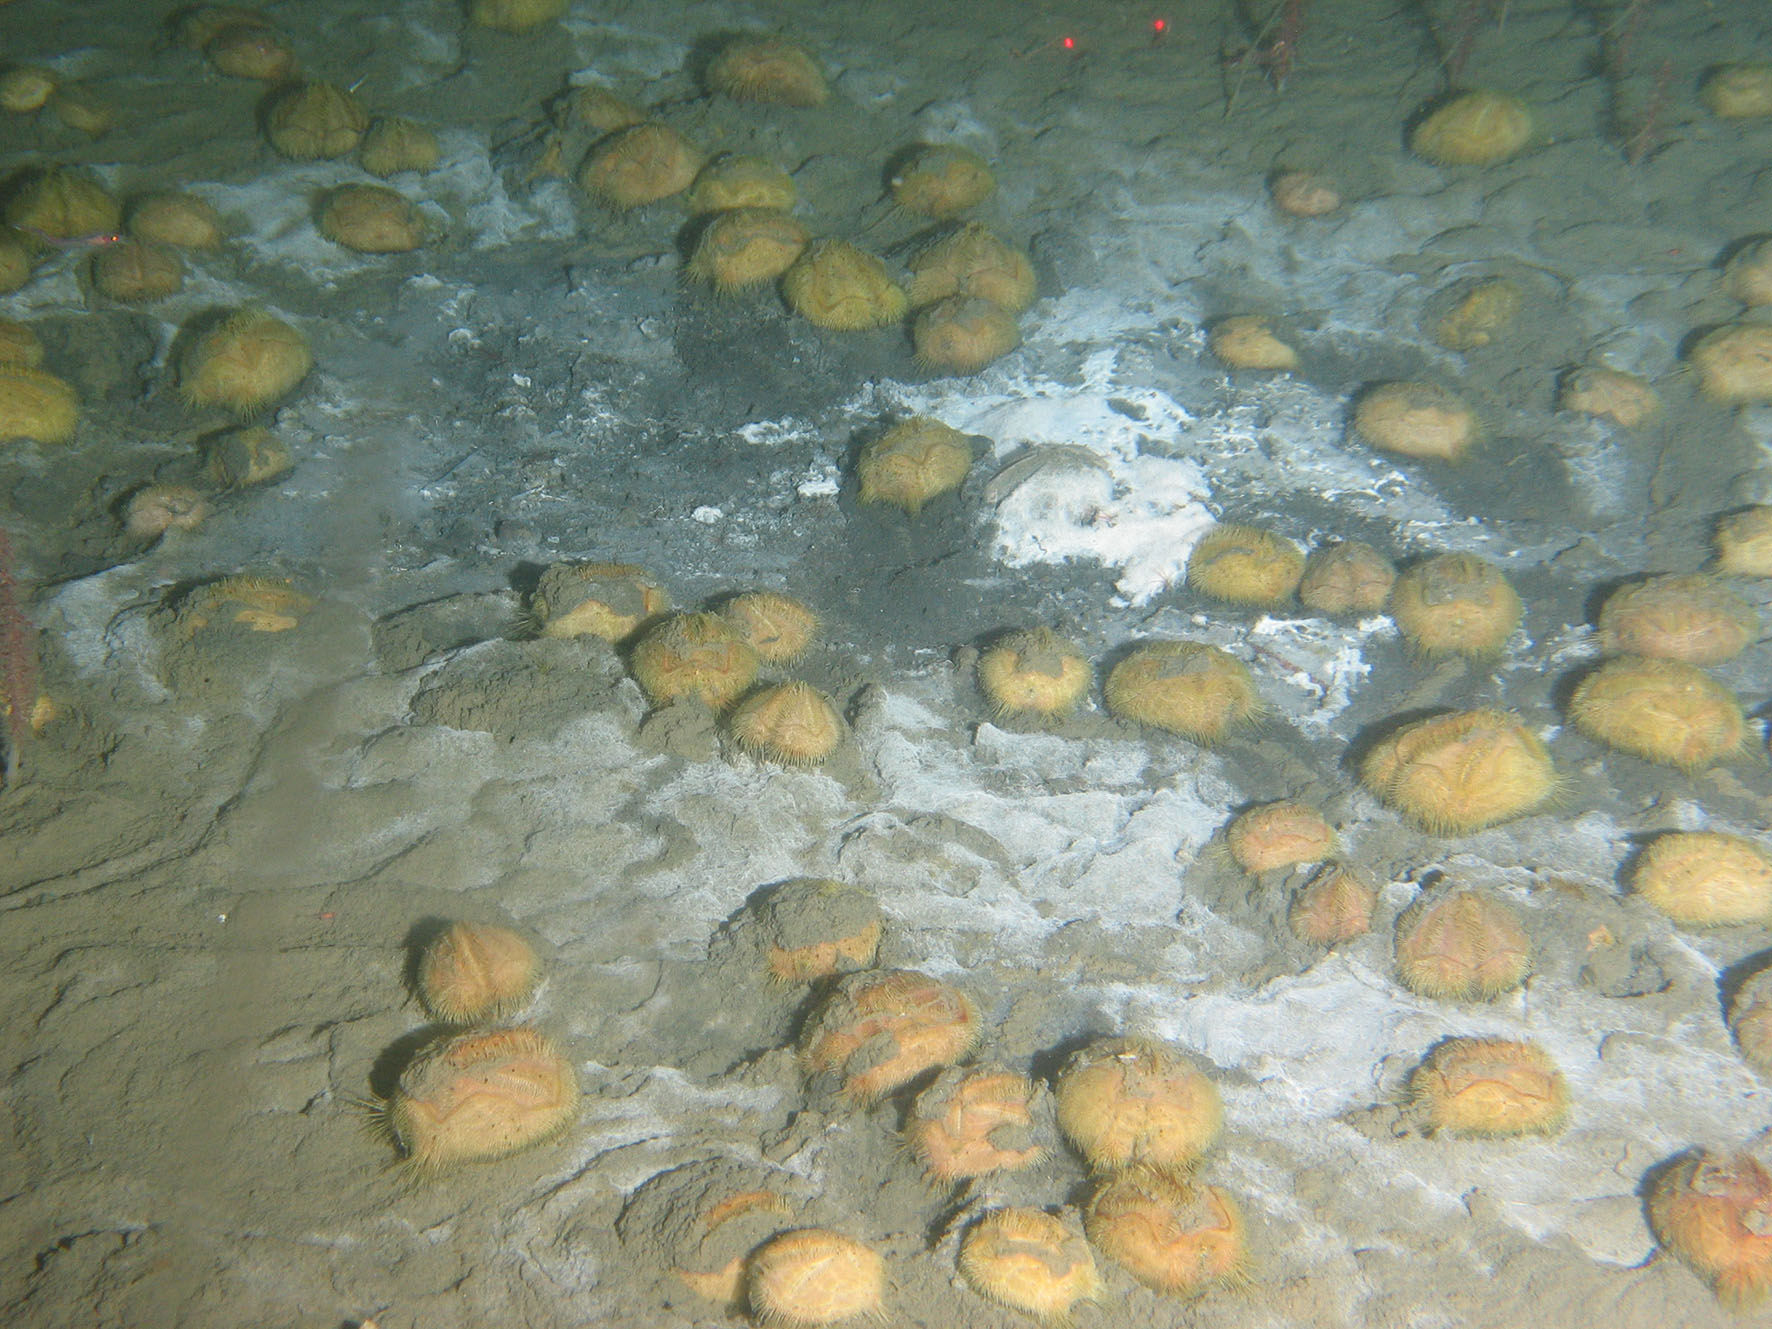 Figure 7. The echinoids Brisaster latifrons attracted by bacterial mat, 417-429 m, Chukotka slope.